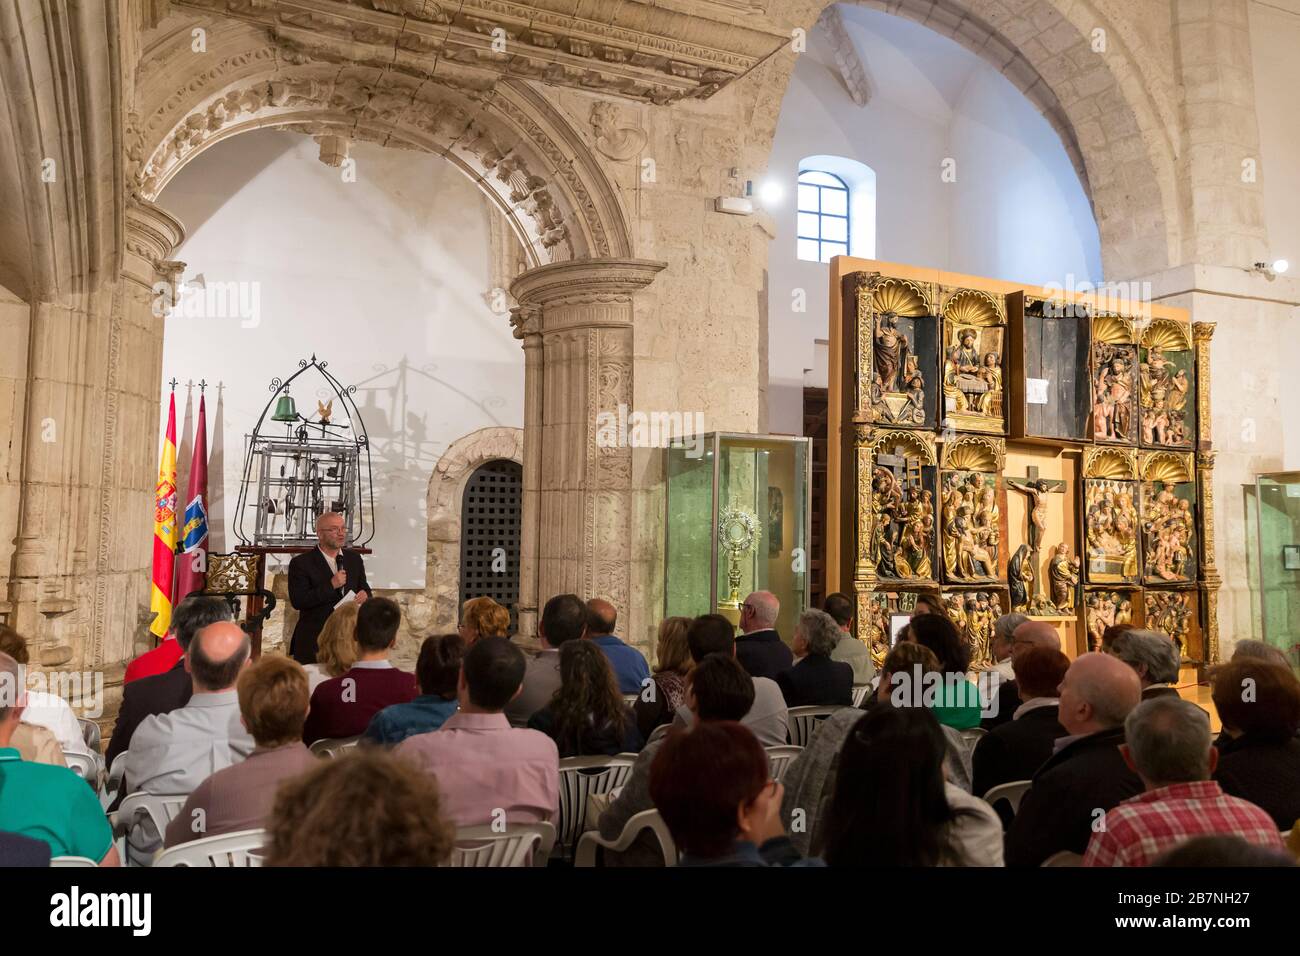 Dedication of a 17th century mechanical clock in the El Museo Comarcal de Arte Sacro in Peñafiel, Castile and León, Spain. The clock, once used the vi Stock Photo